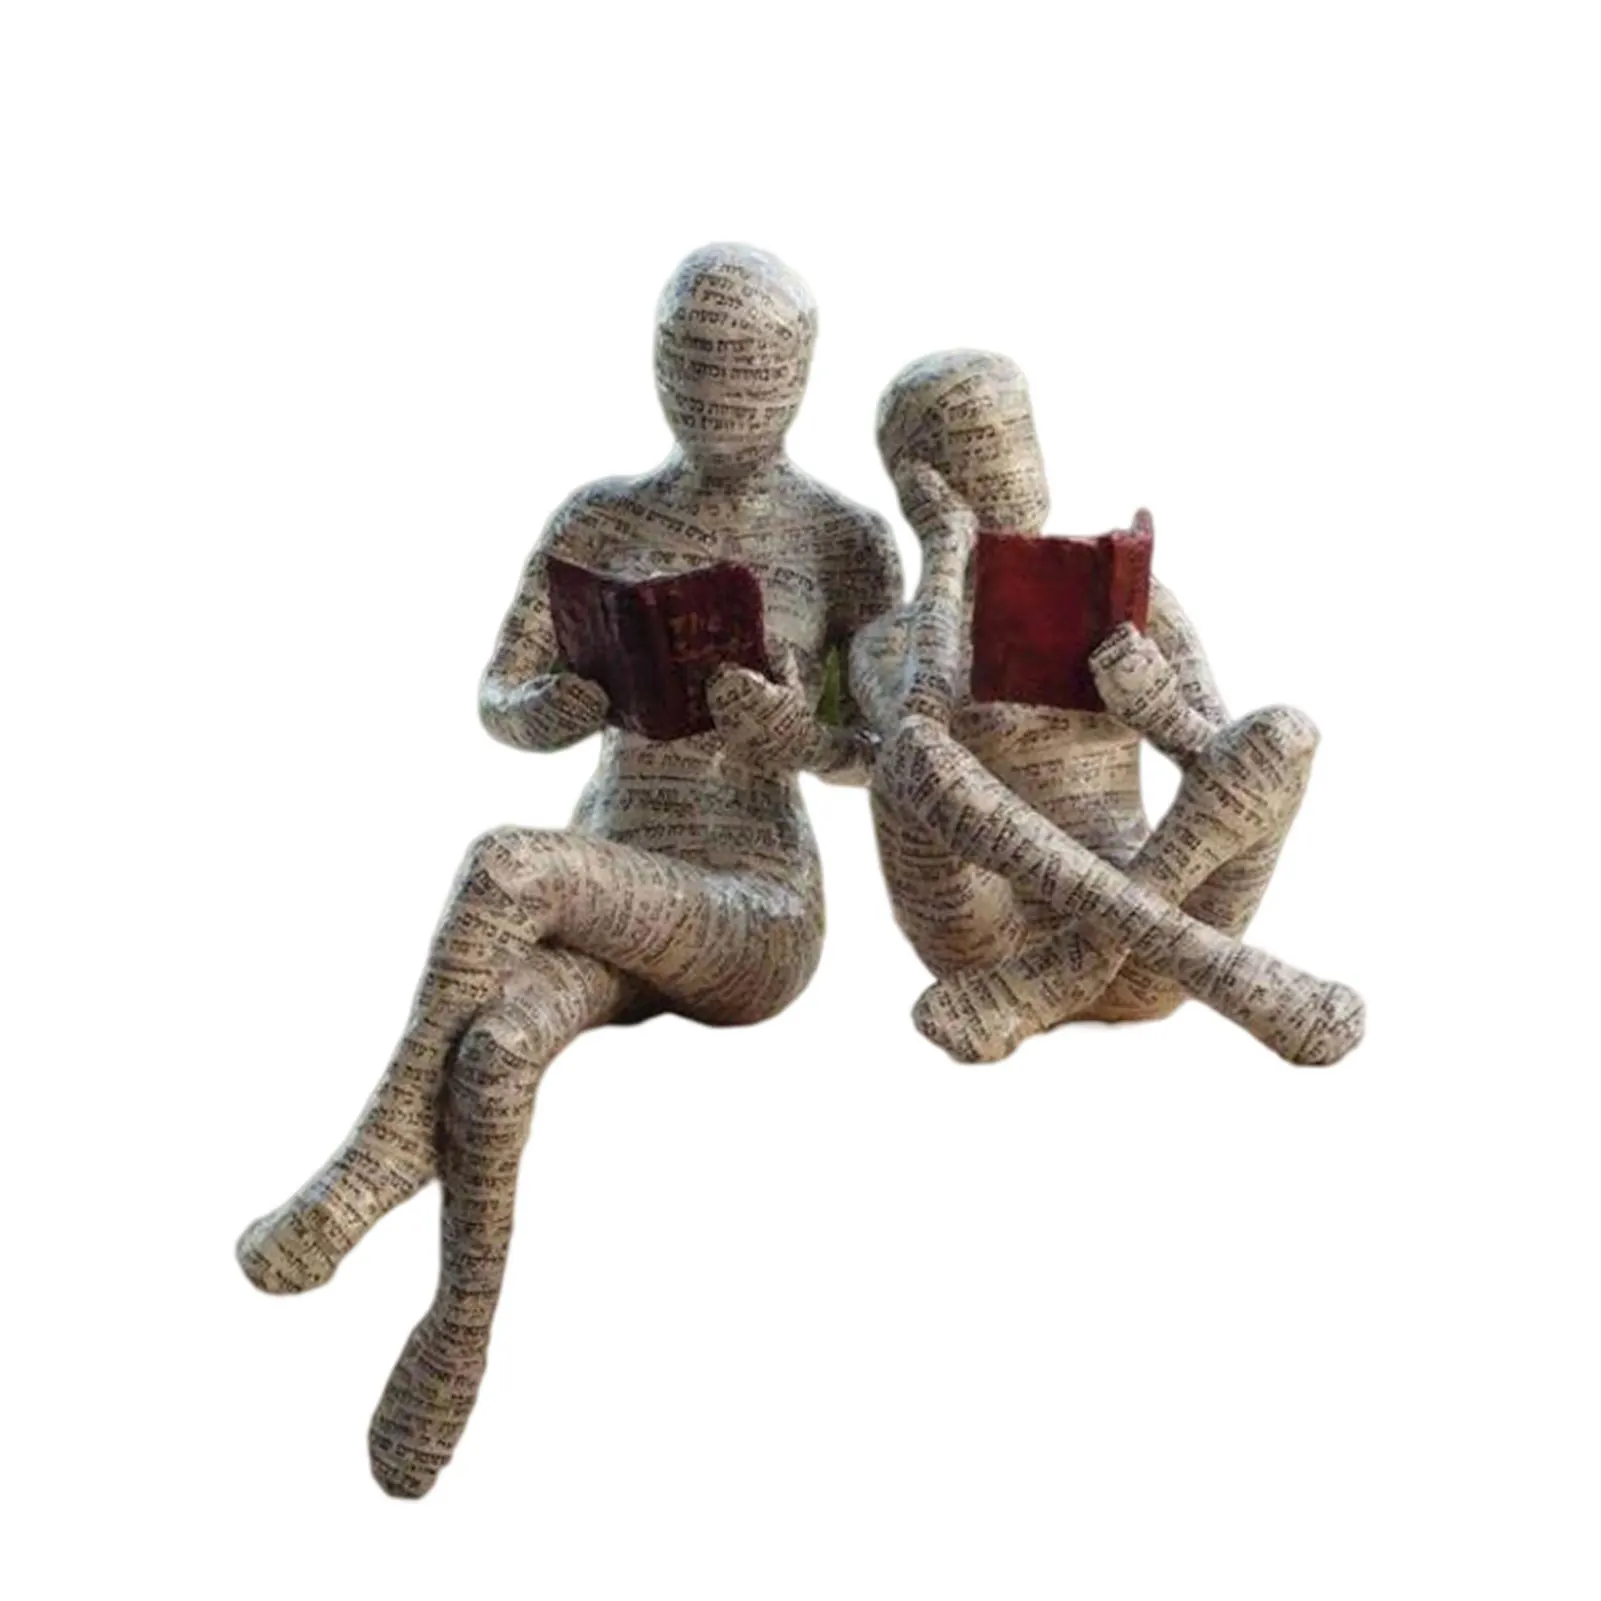 Reading Woman Figurine Pulp Bookshelf Decor Thinker Style Resin Statue Resin Abstract Sculptures Figurines